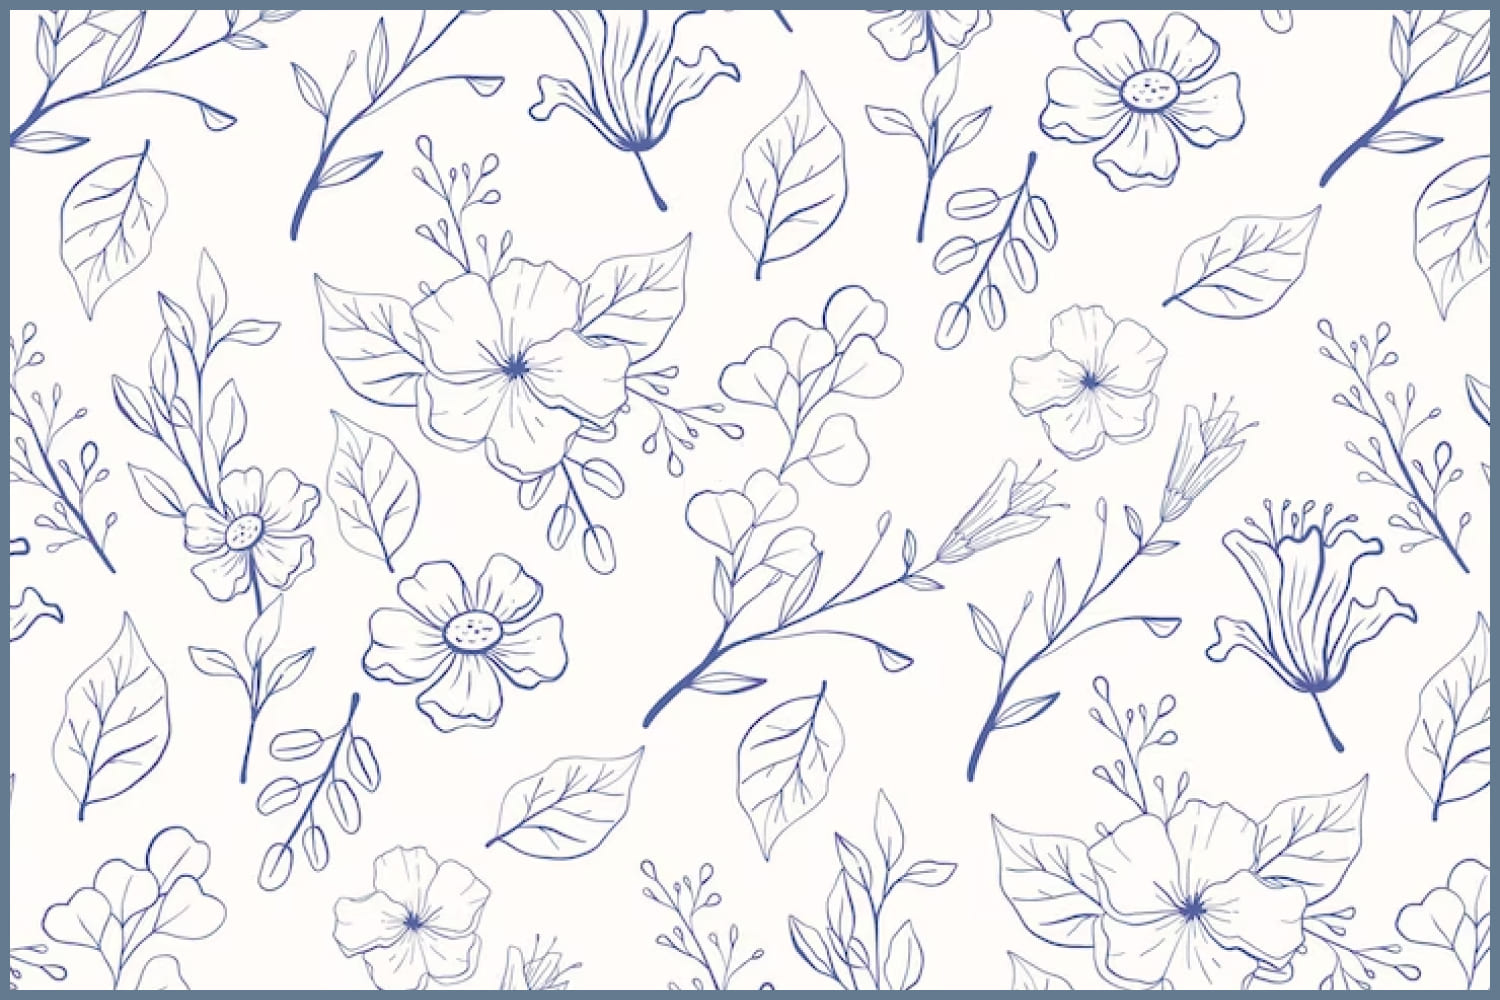 Drawn with thin lines of flowers and leaves in blue.